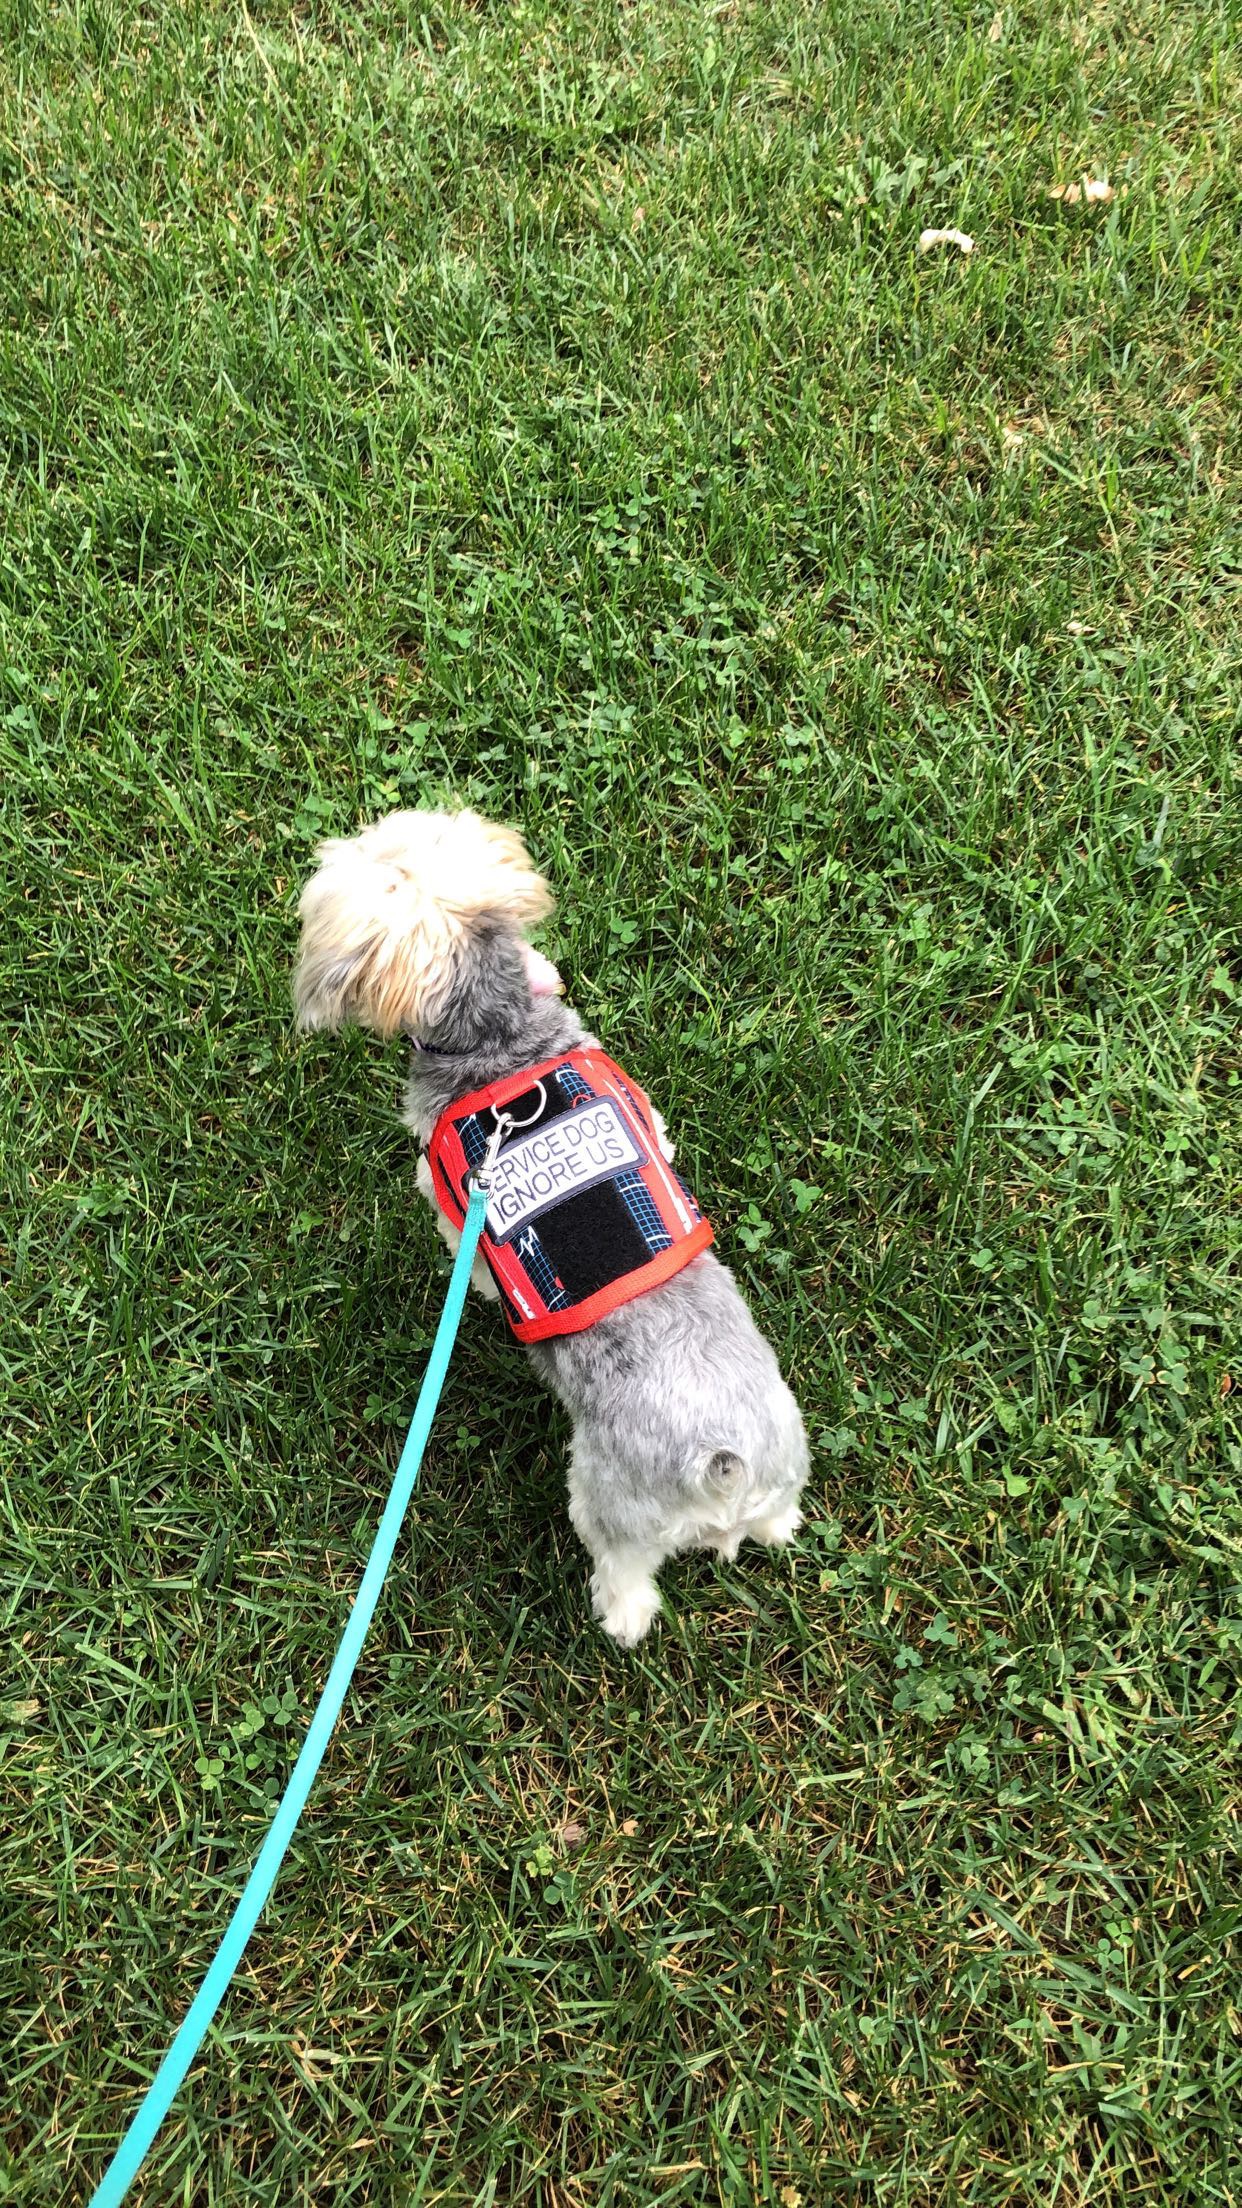 Above view of Poppy, a small gray service dog, wearing vest and leash walking through grass